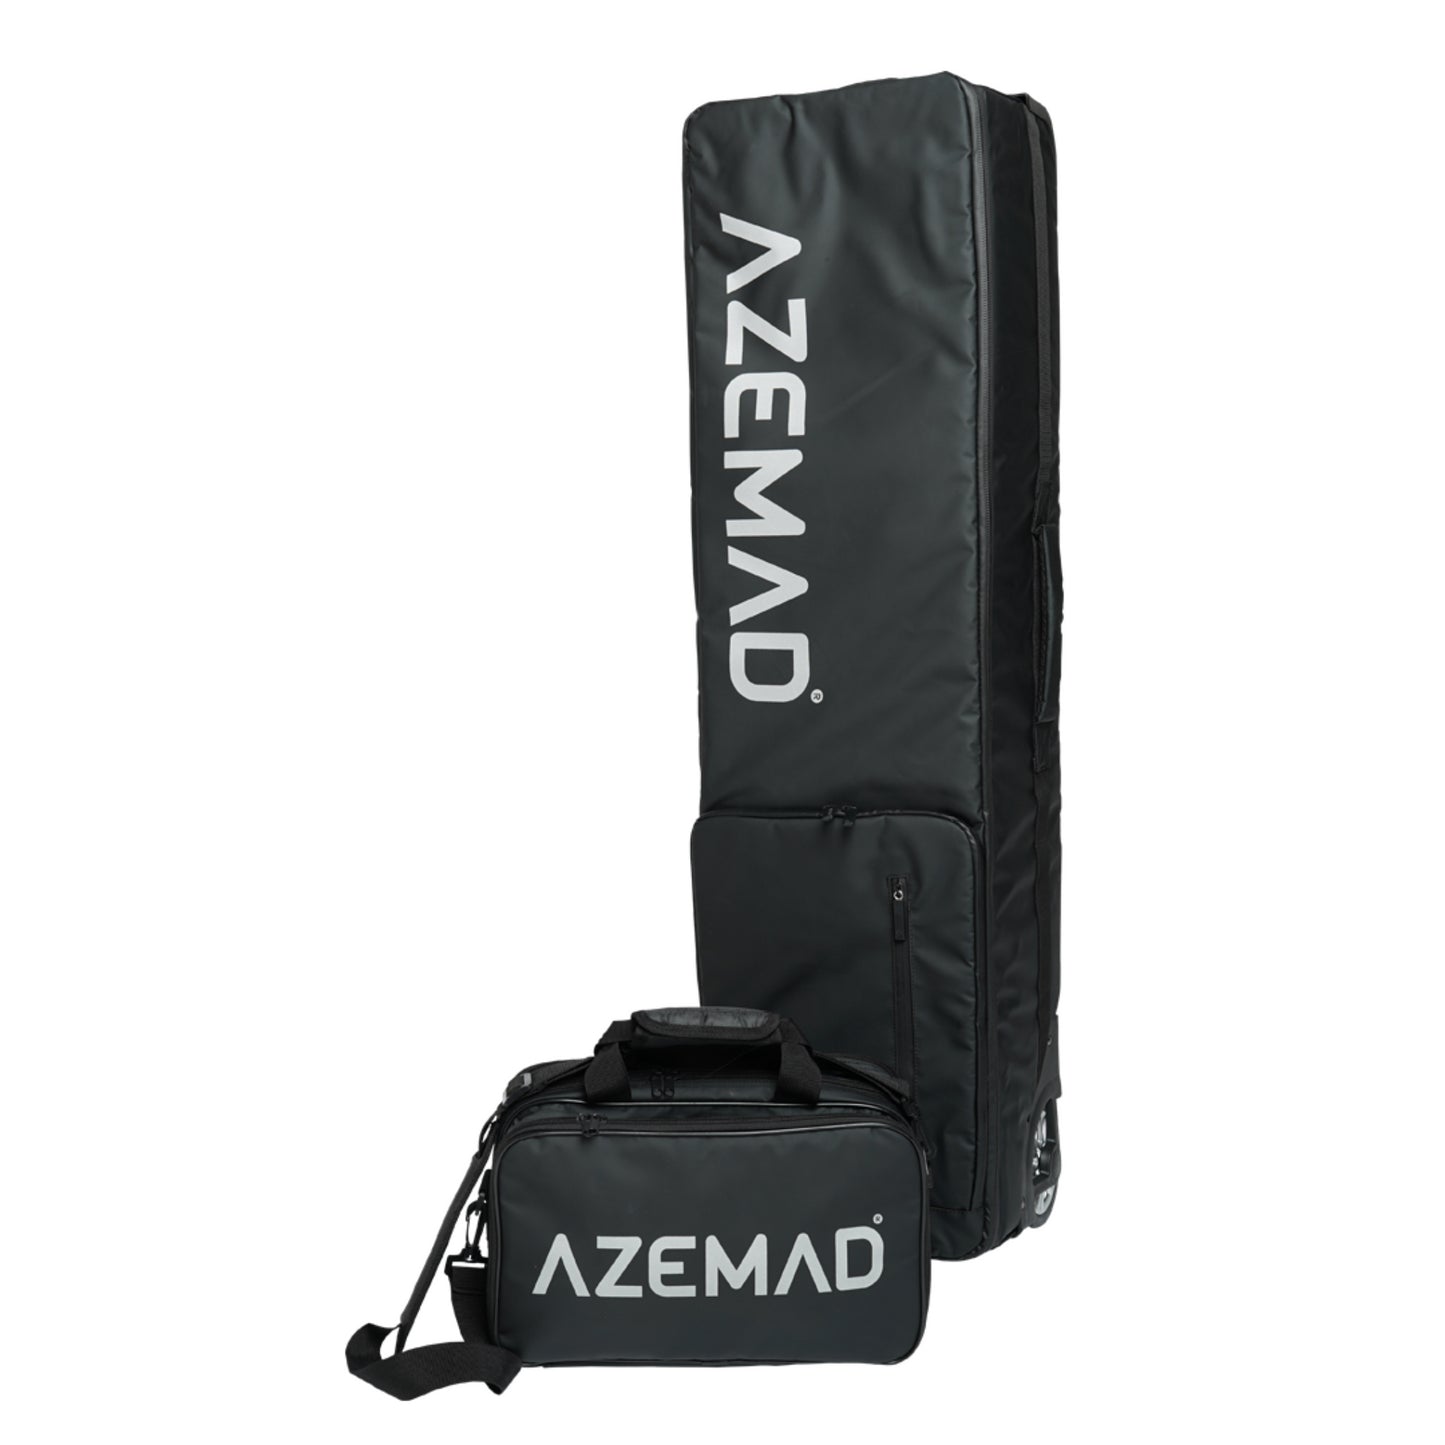 AZEMAD Stick Trolley for Equipment (25 sticks) + Technical Bag